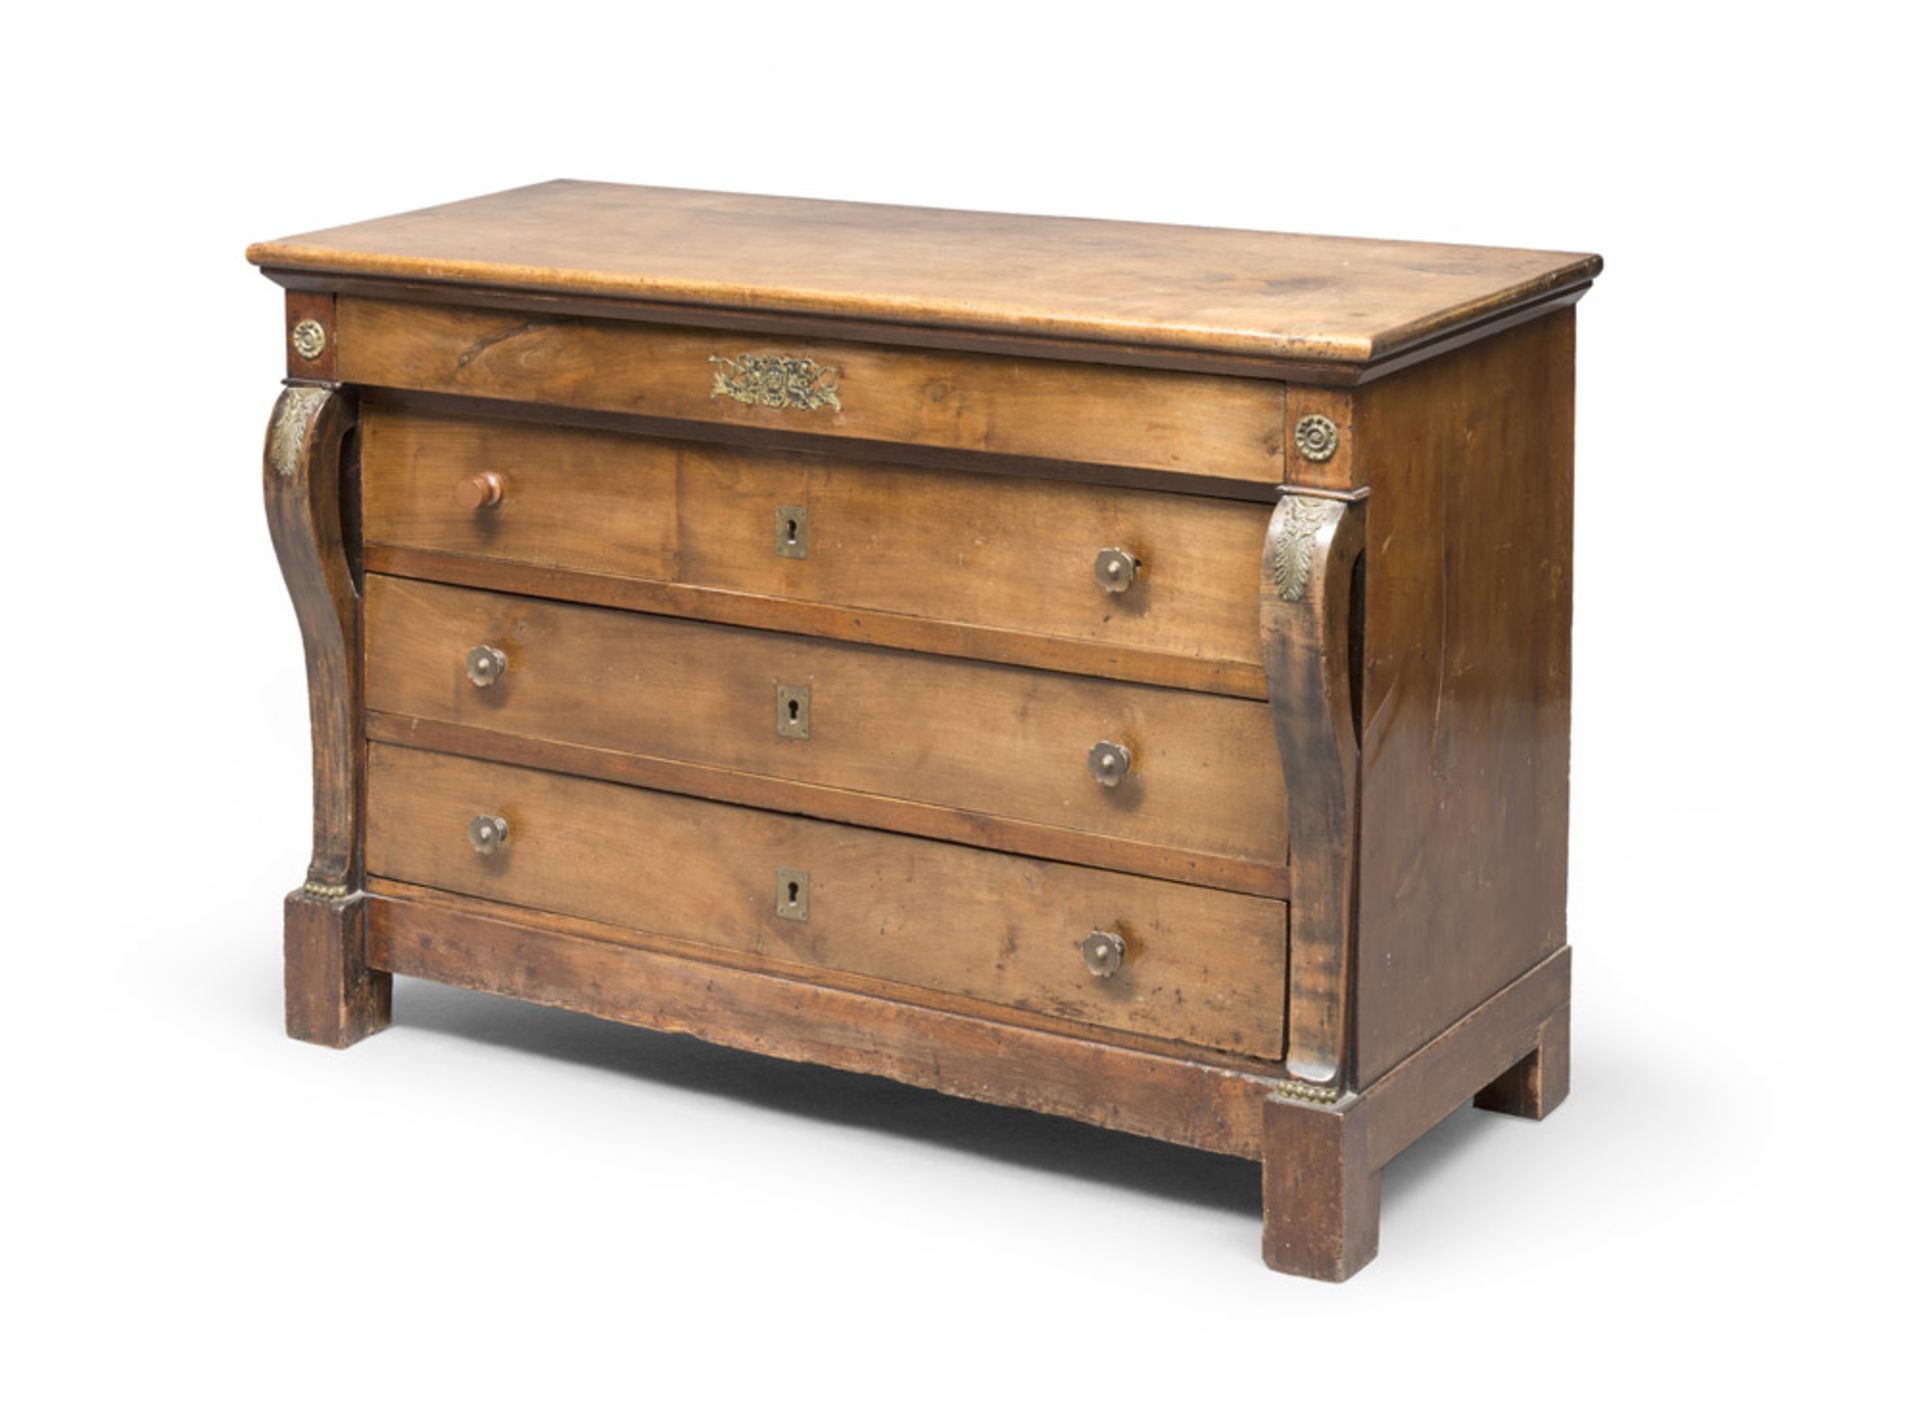 Clear walnut-tree Commode with gilded metal decorum, Piedmont, Empire period. Measures cm. 88 x